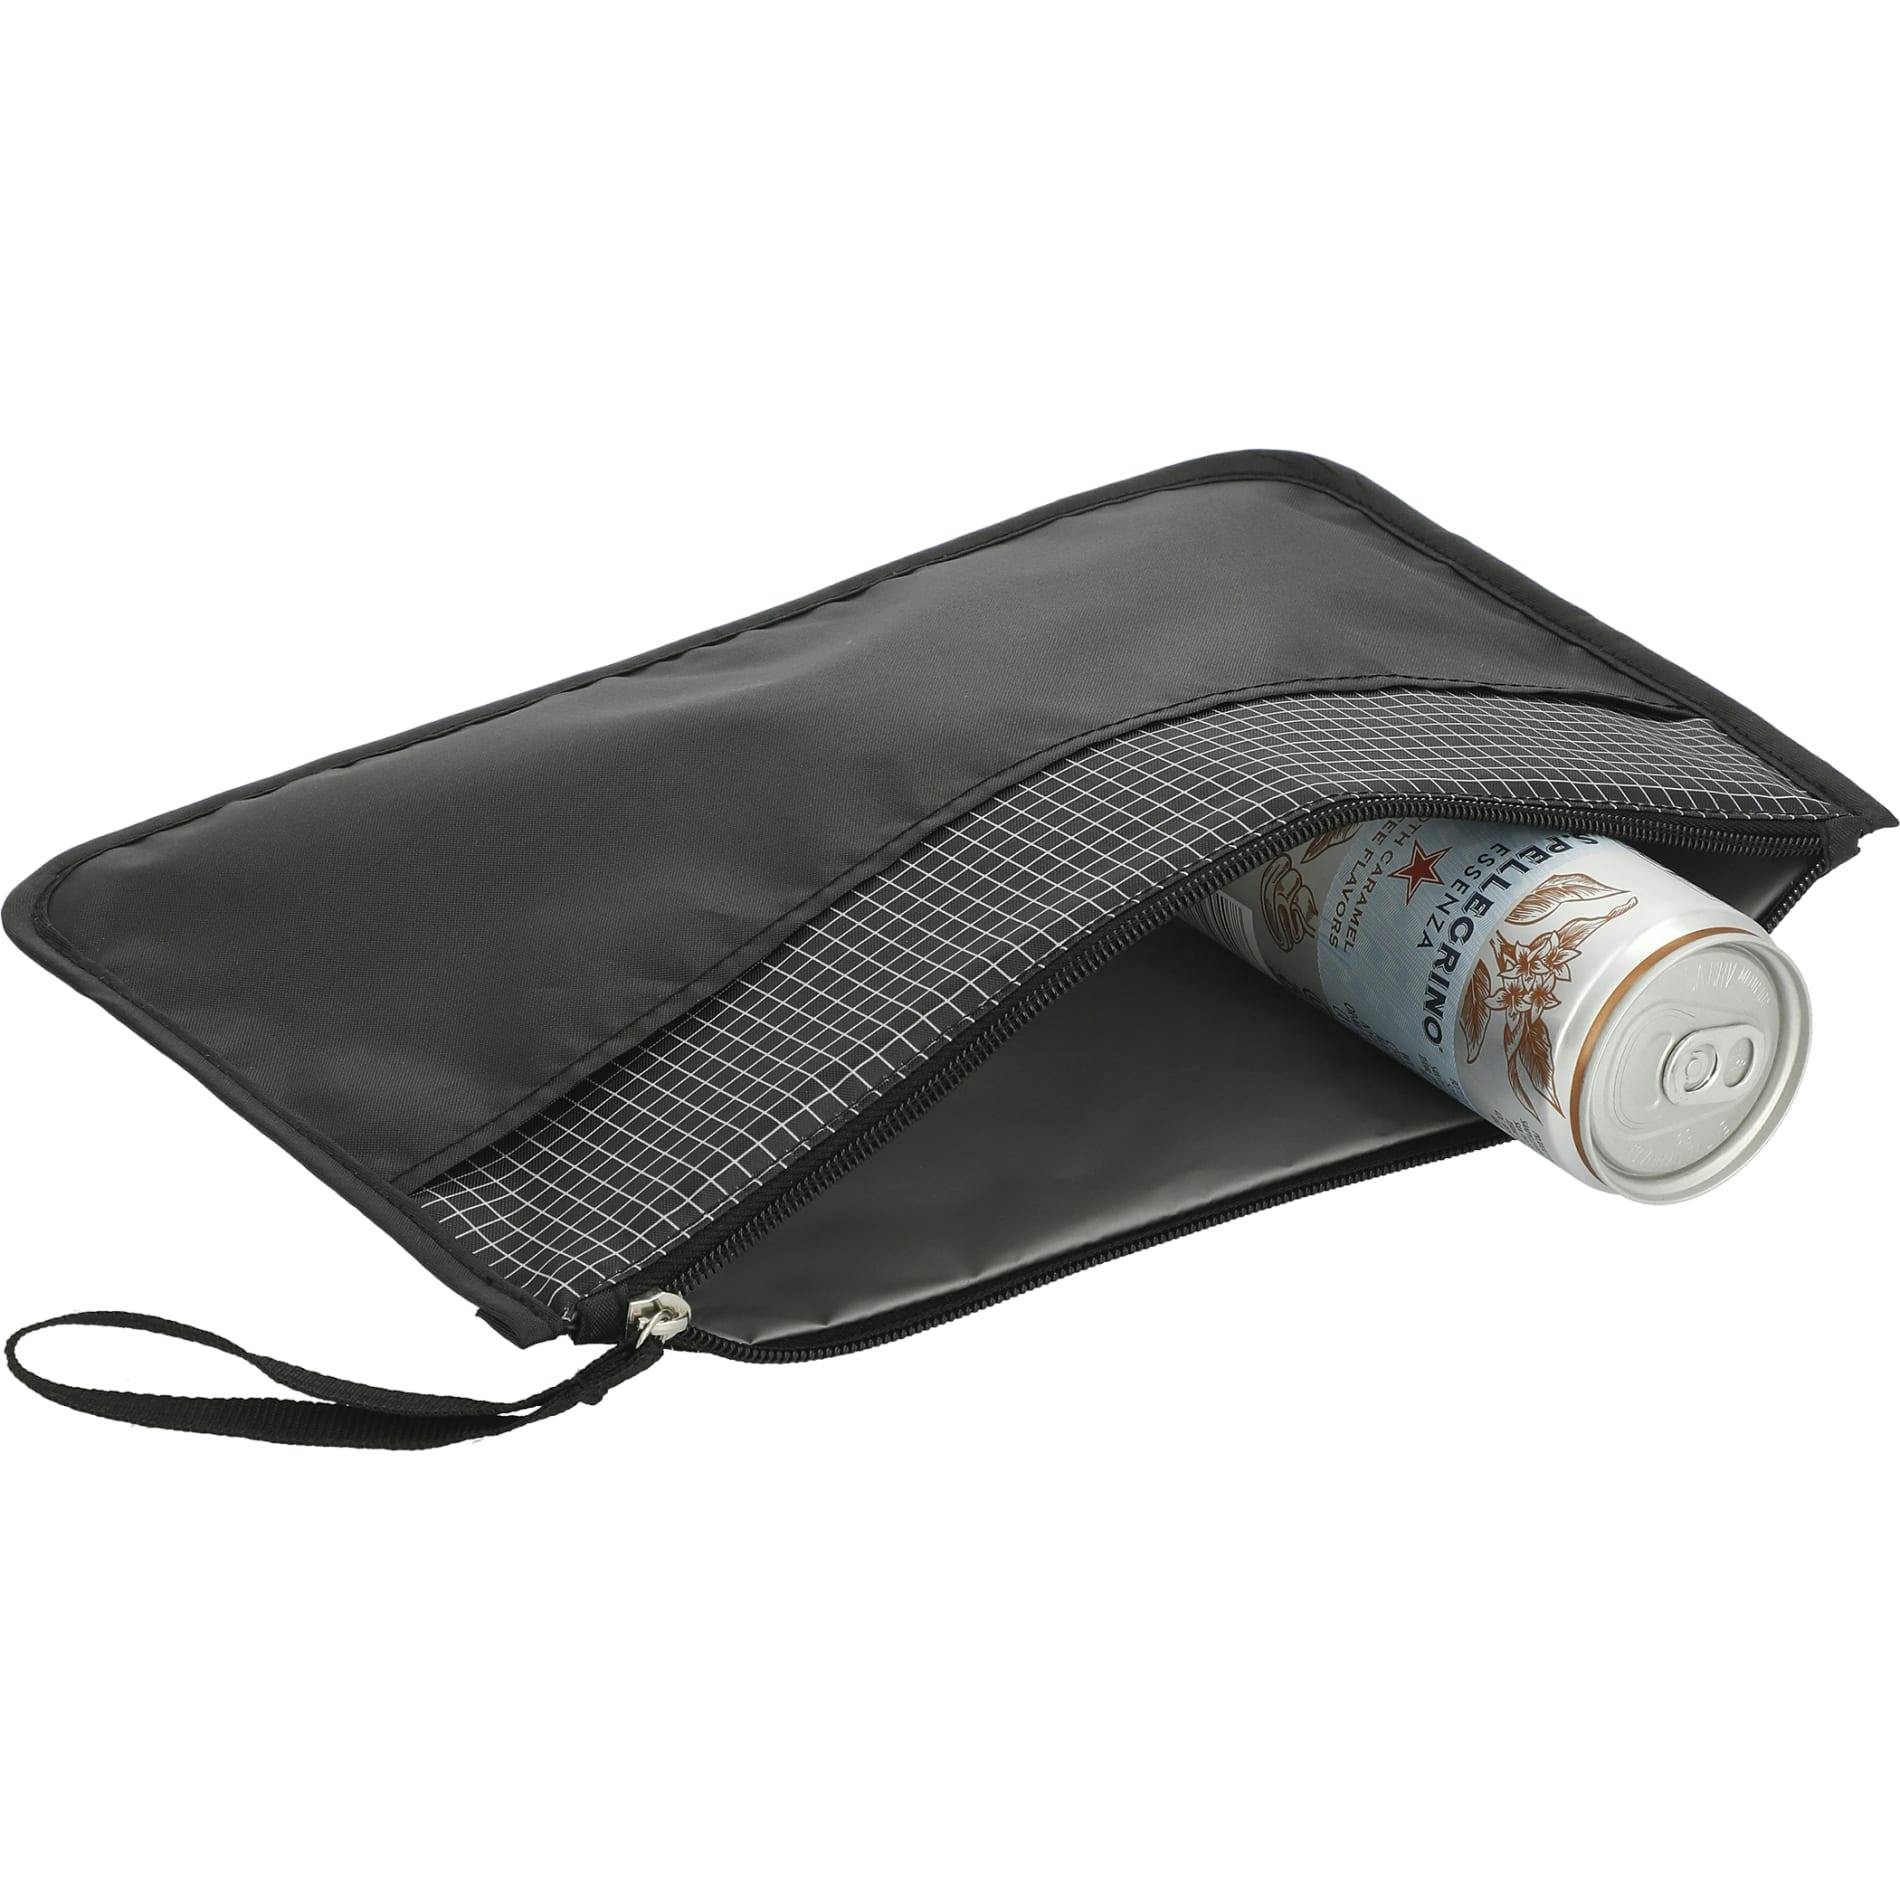 Grid Wet Dry Pouch - additional Image 1